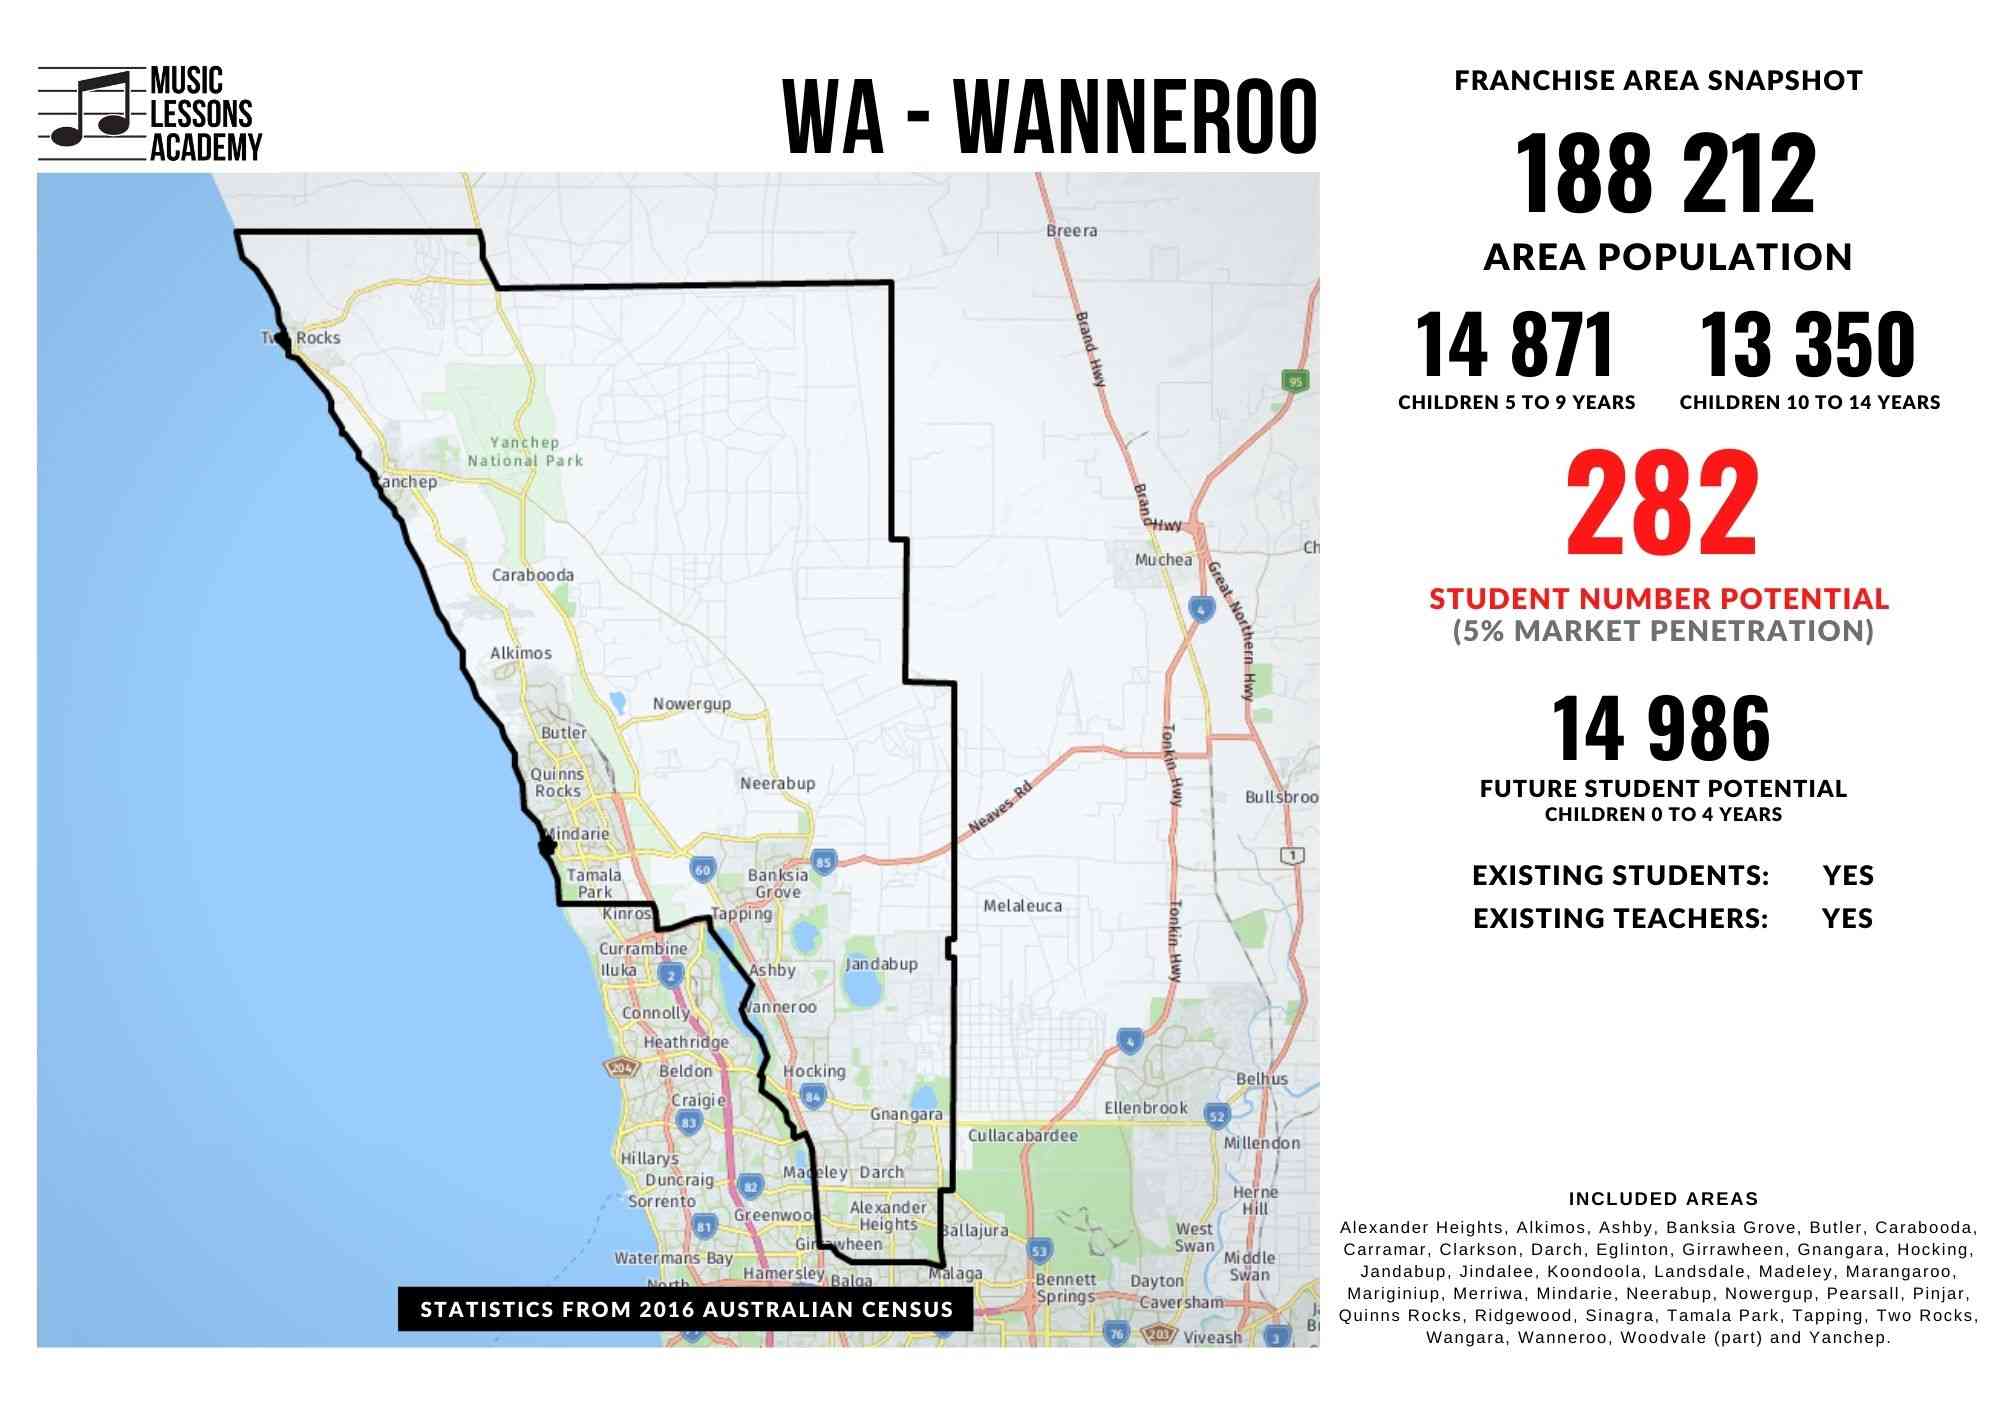 WA Wanneroo Franchise for sale